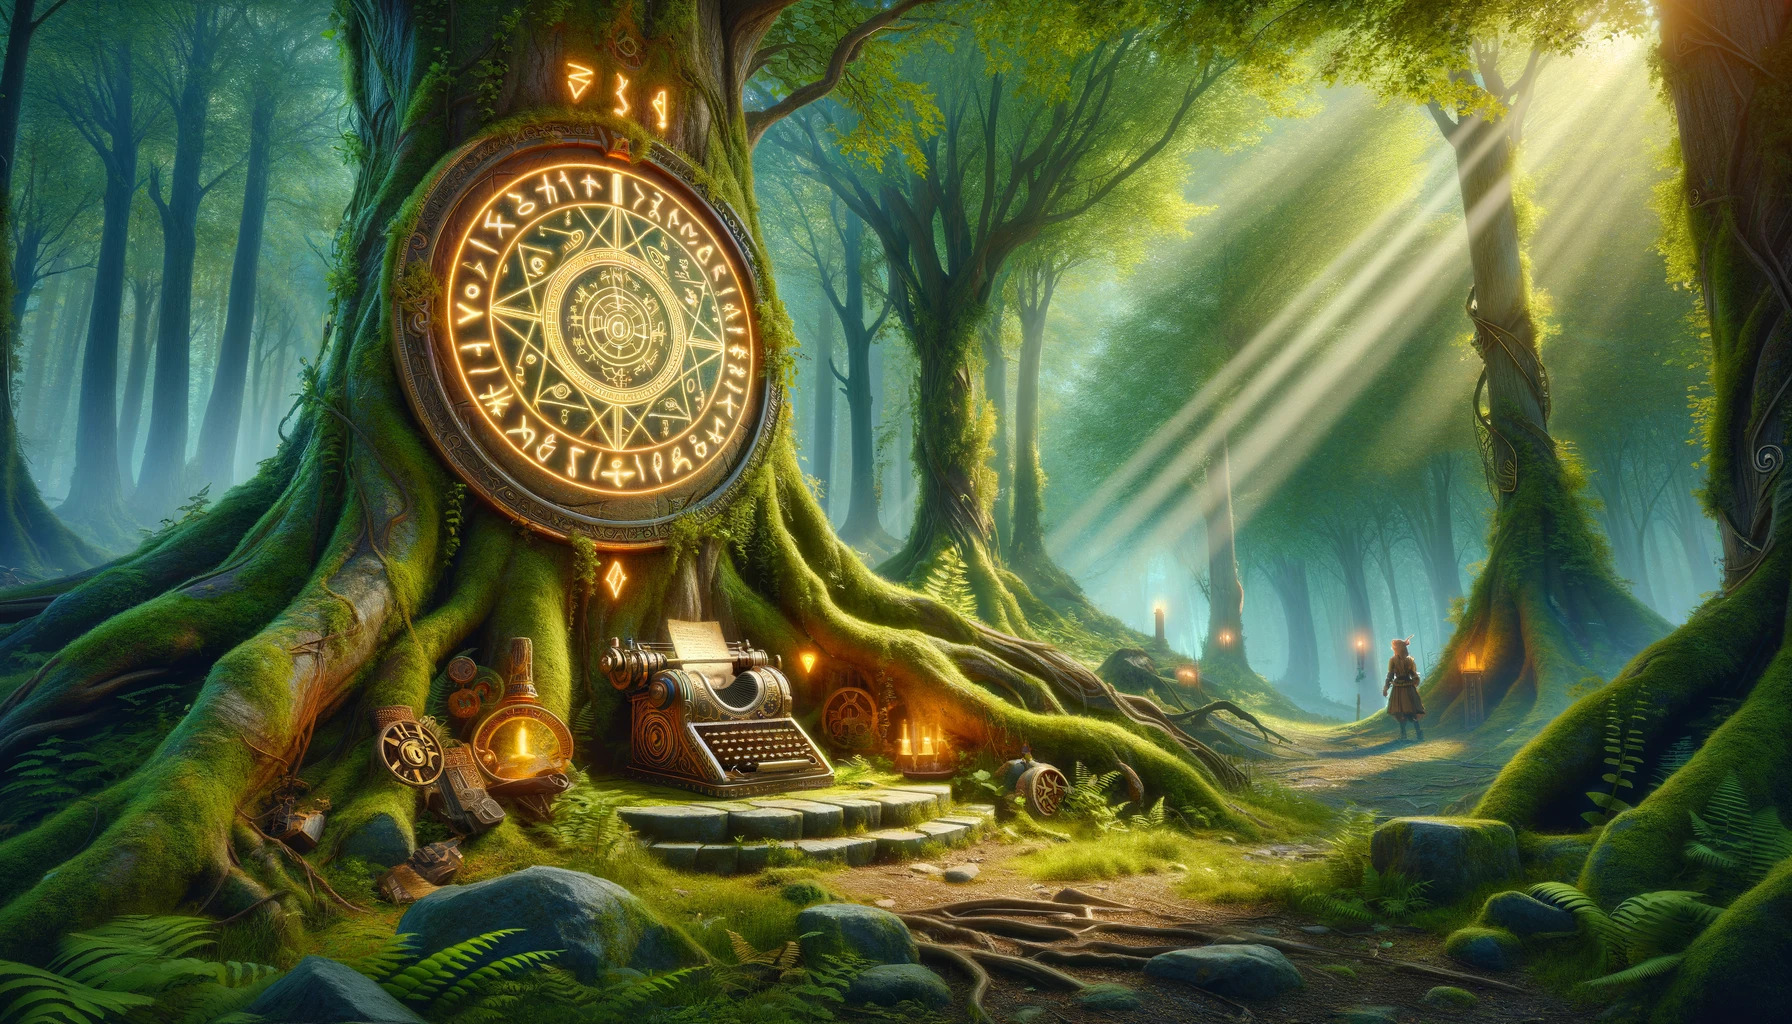 Here is a cinematic image depicting a mystical forest setting with a fantasy theme, suitable for the concept of a wood elf name generator. This enchanting scene captures the essence of a magical forest, complete with an ancient tree, glowing runes, and a magical device. The serene and captivating environment is brought to life with wood elves in the background, adding to the fantasy atmosphere.